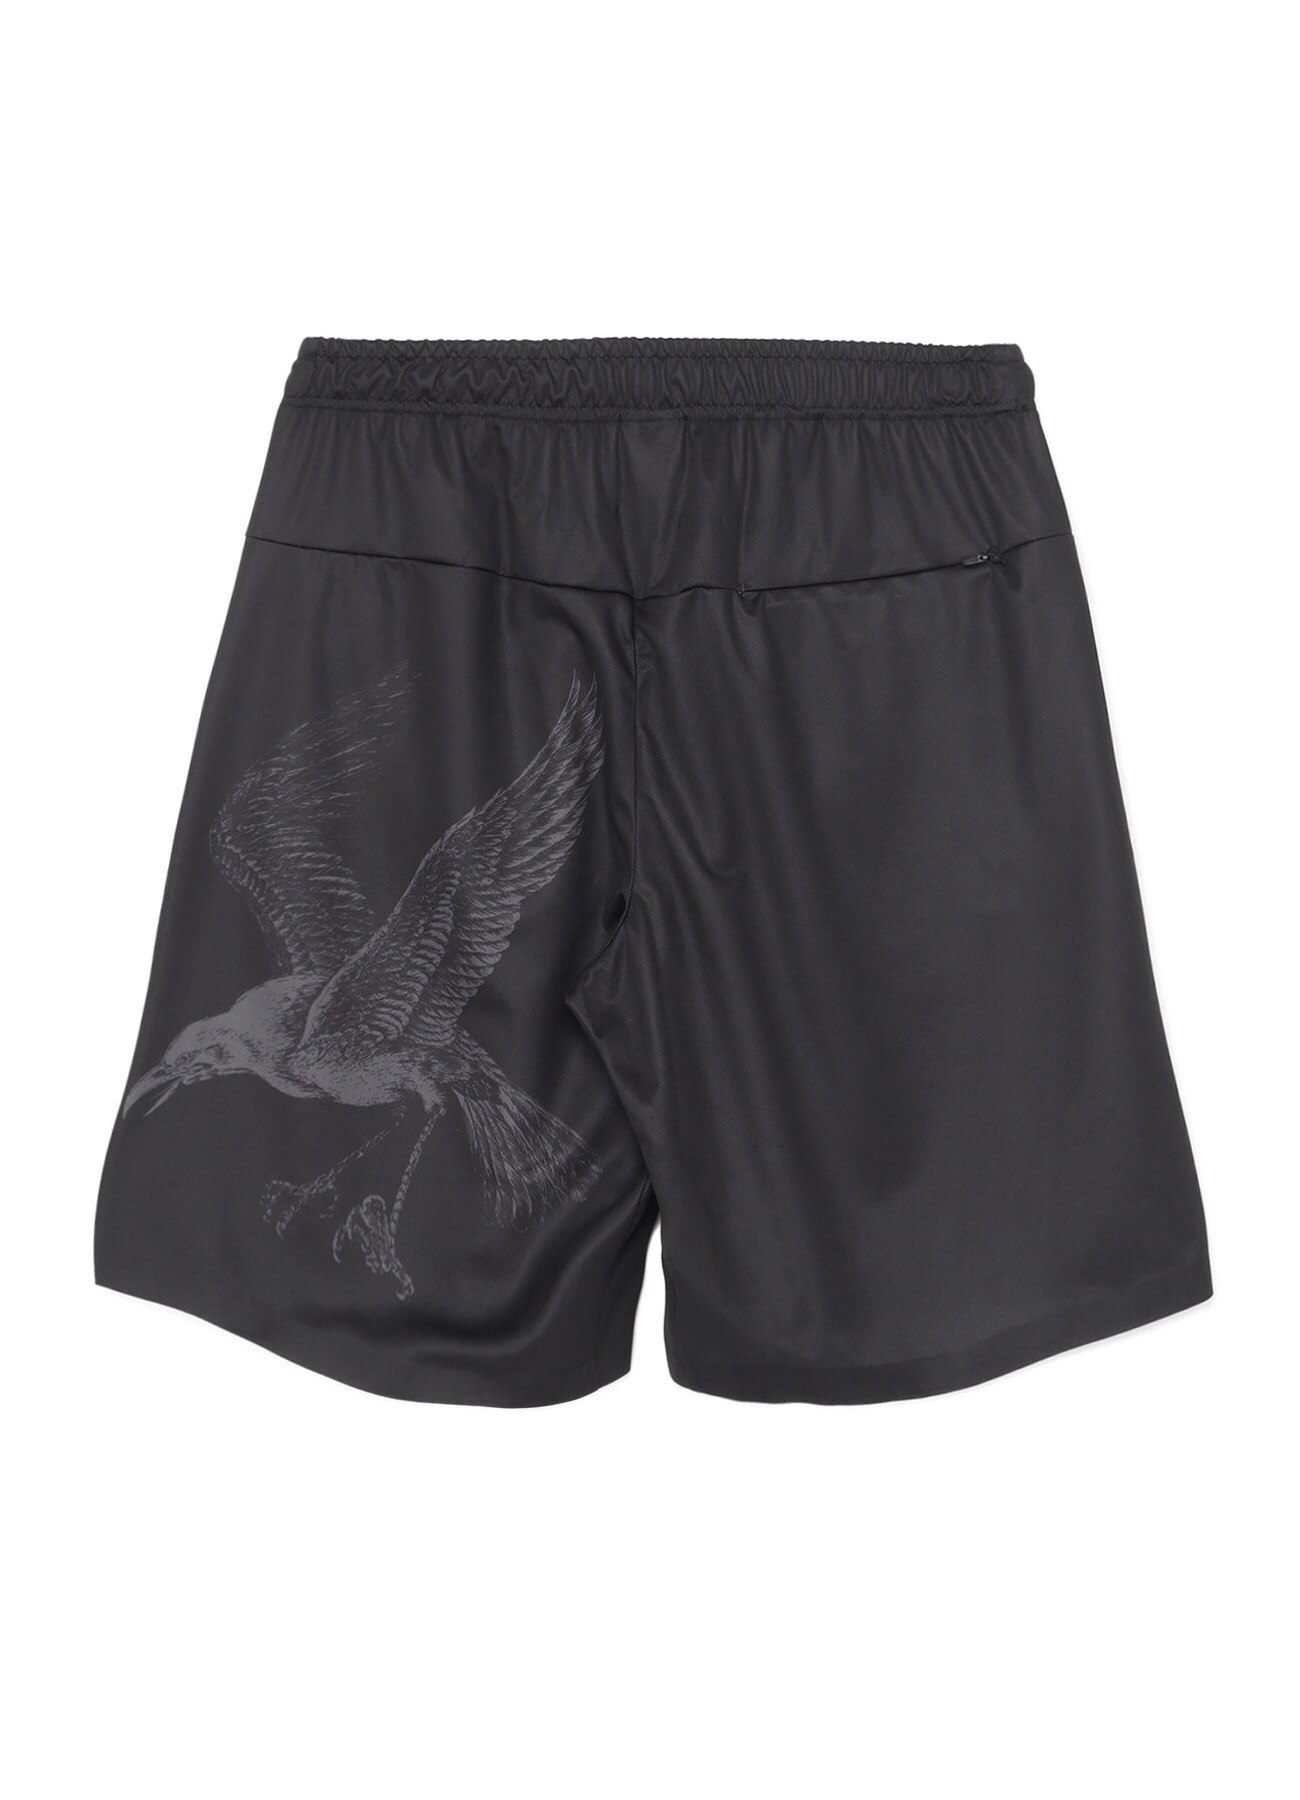 F.C.Real Bristol OVER SIZED GAME SHORTS